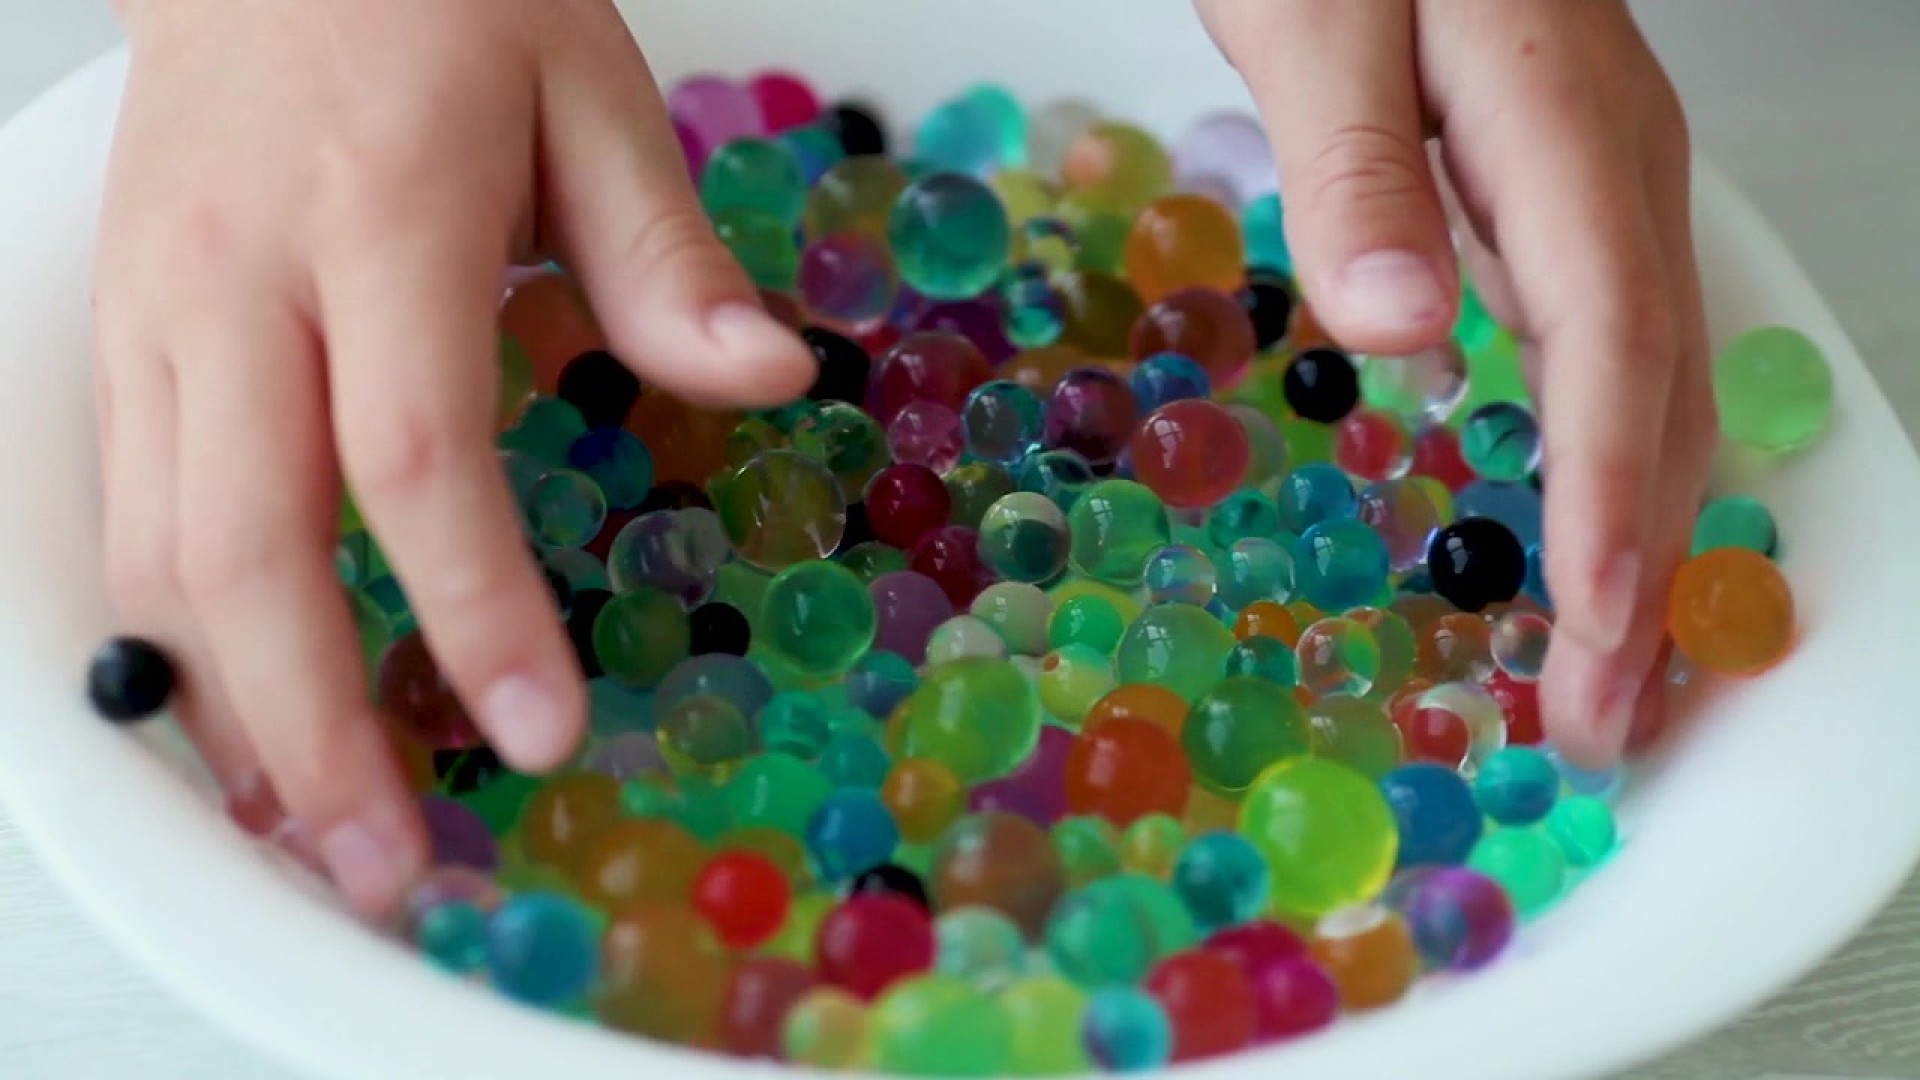 Dangers of water beads toys